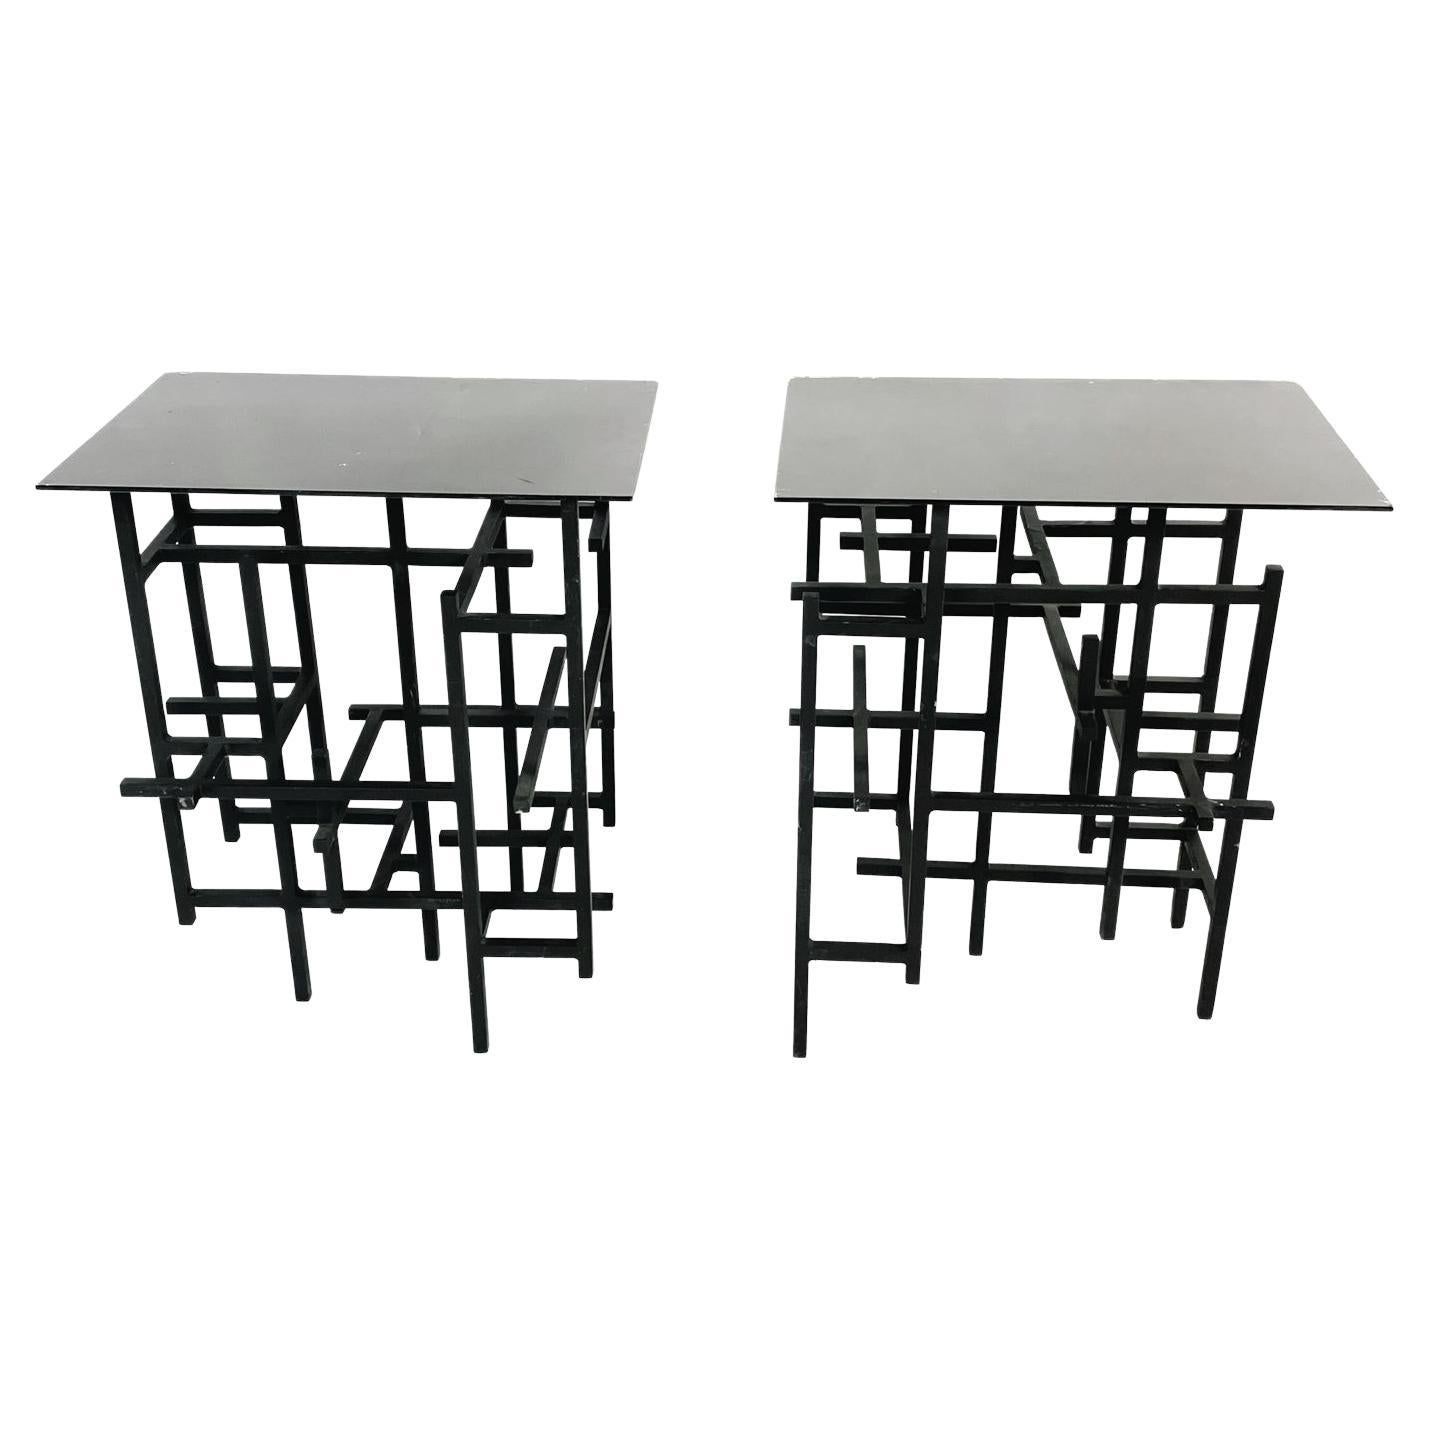 Pair of Steel & Glass End or Console Table